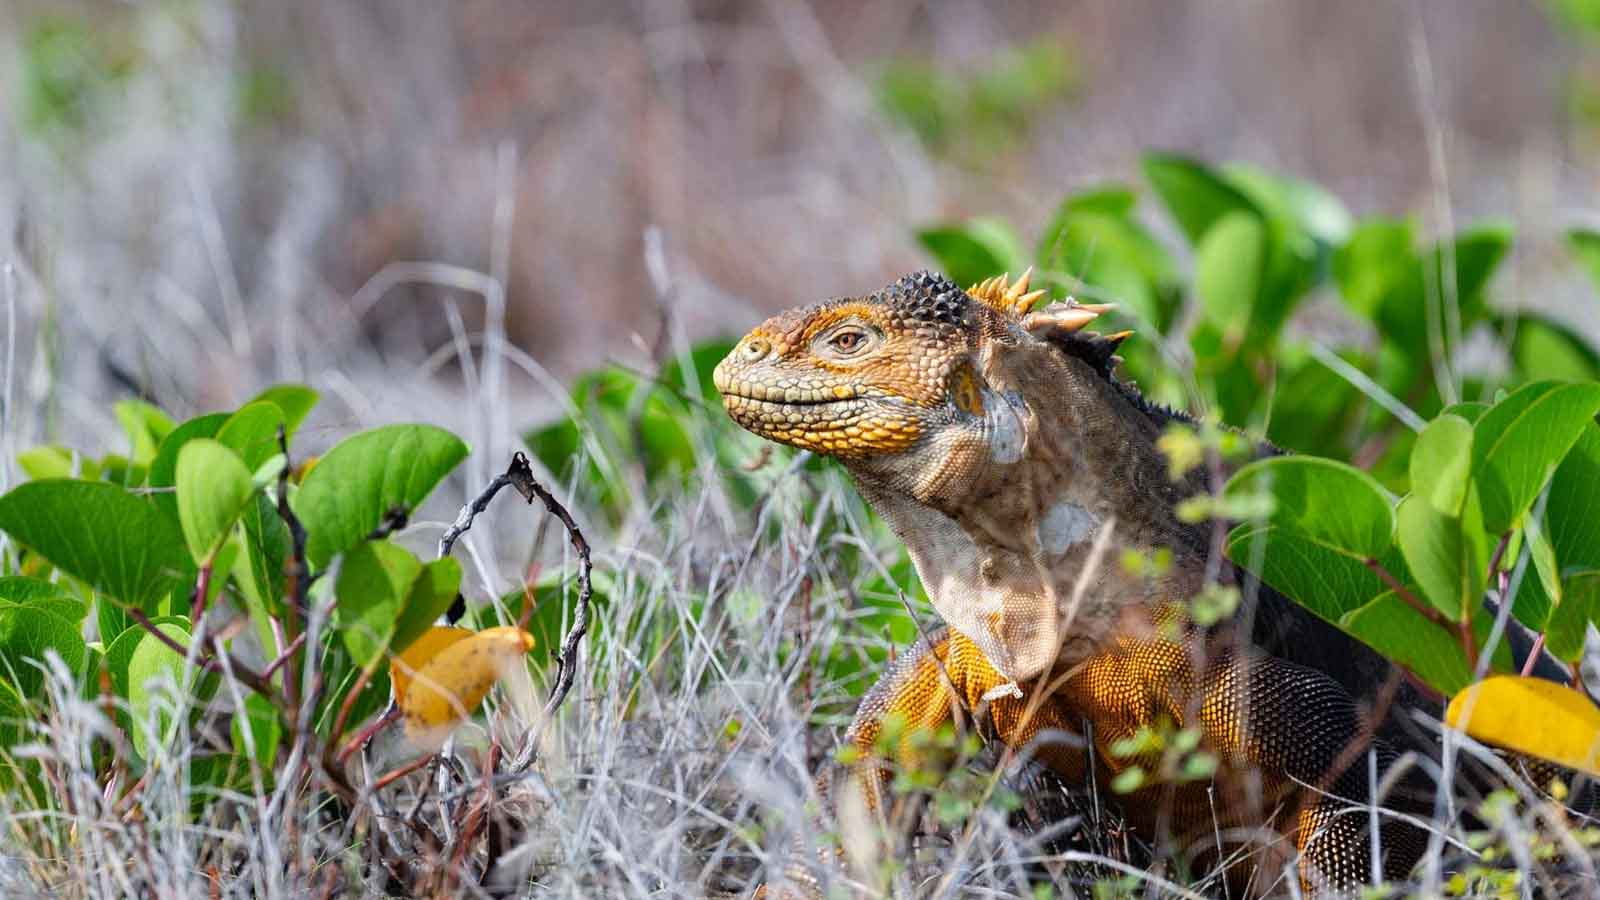 Galapagos Island hosts iguanas, which were nearly extinct for 200 years